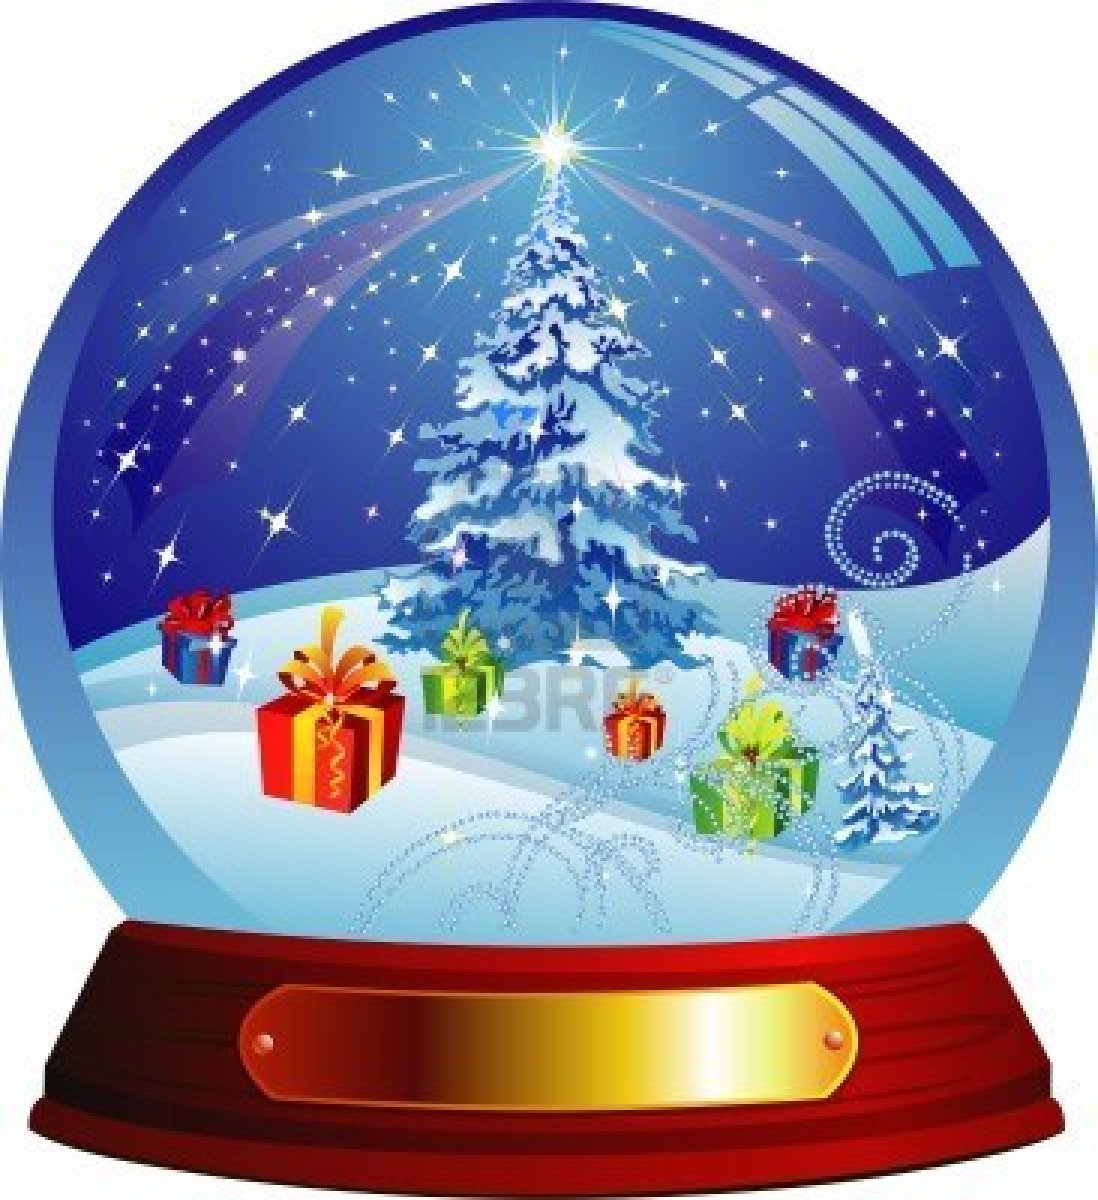 Free Christmas Cliparts Snow, Download Free Clip Art, Free.